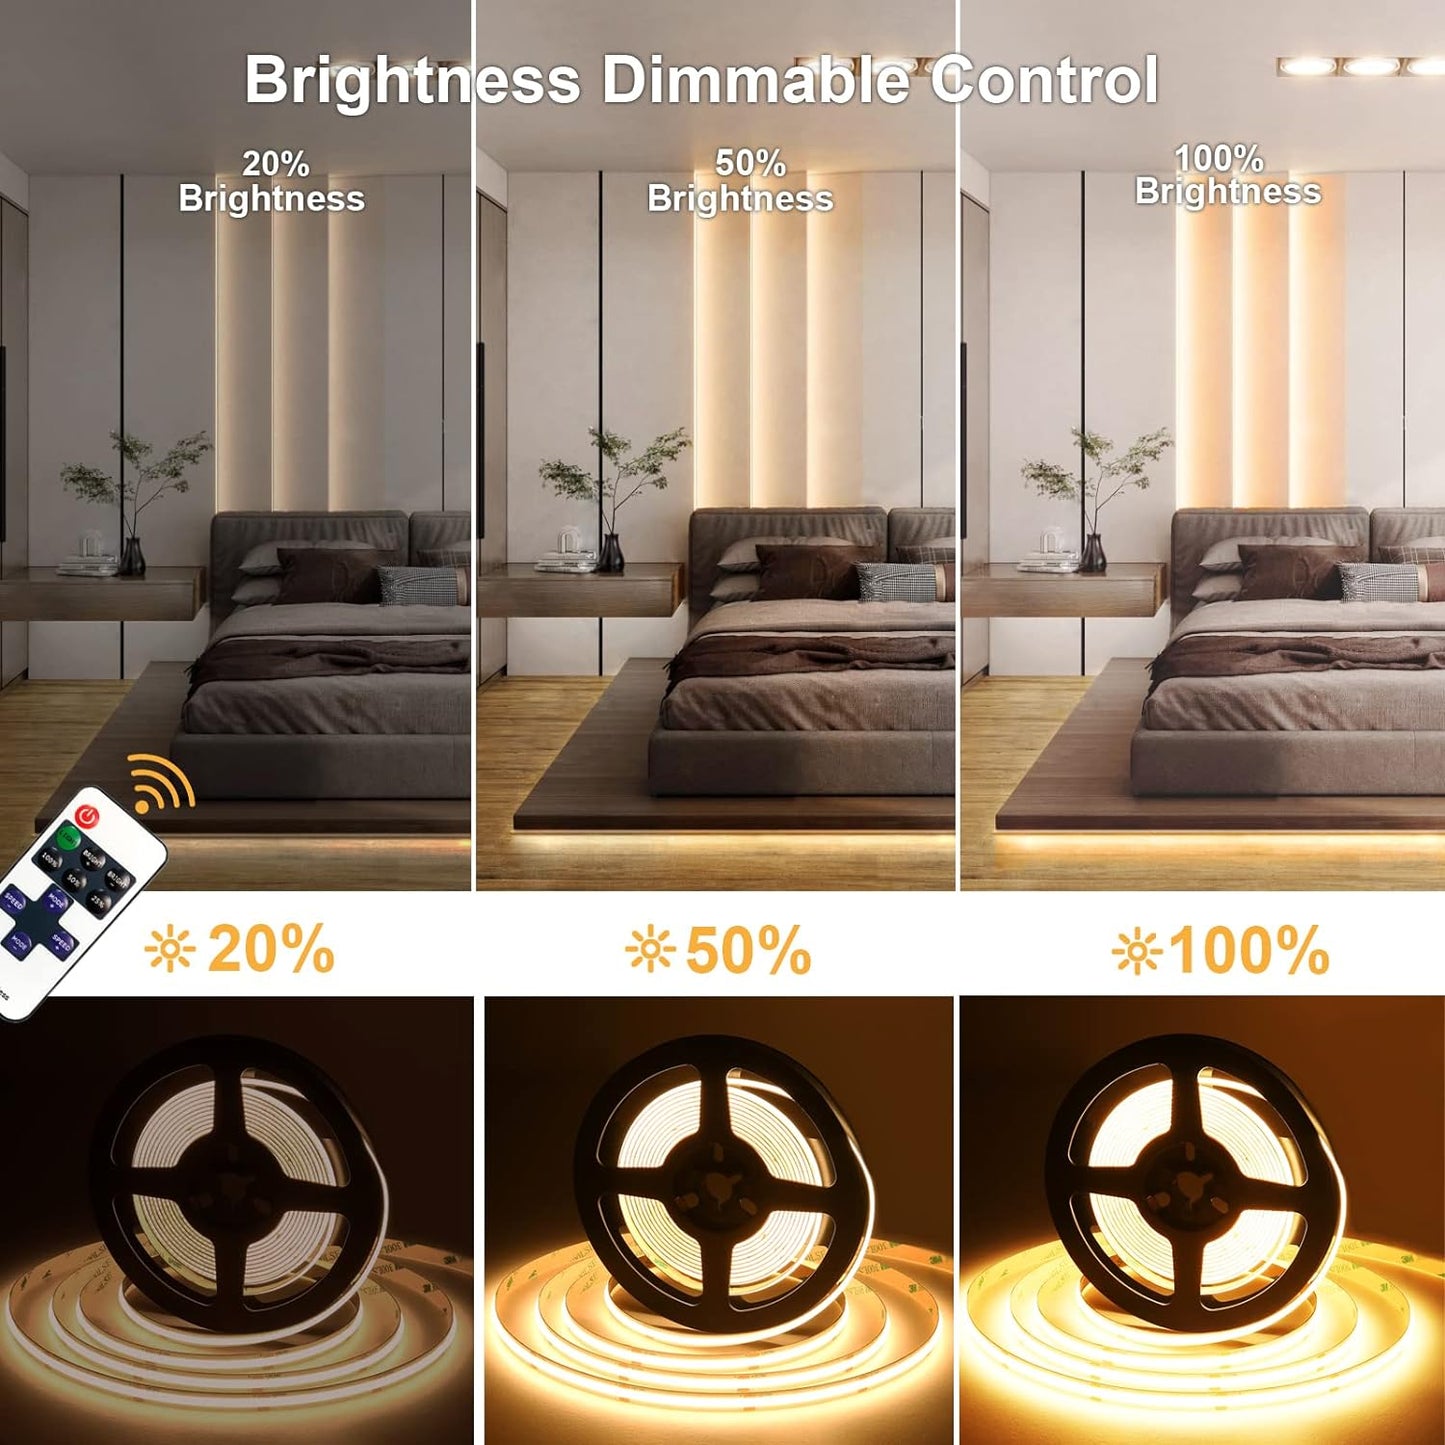 Hicolead COB LED Strip Kits,CCT Tunable2700-6500K LED Tape Lights with Power Supply for Room Deation